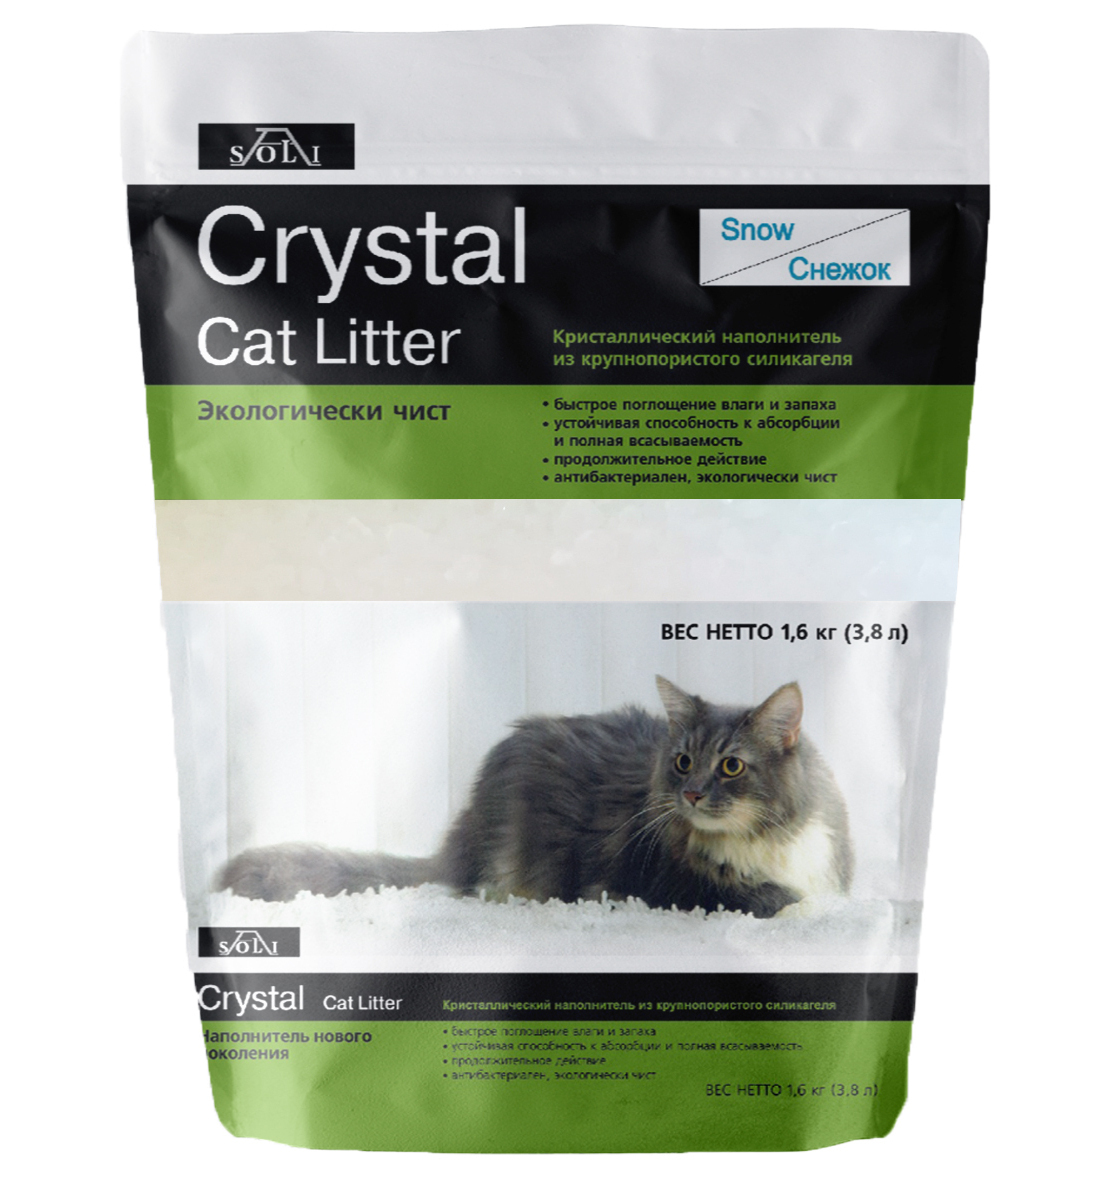 Crystal cat. Crystal Cat Litter наполнитель. Наполнитель силикагелевый а-соли Радуга премиум 3,8л/1,6кг. Наполнитель снежок силикагель. Впитывающий наполнитель Silitter Crystal 3.8 л.